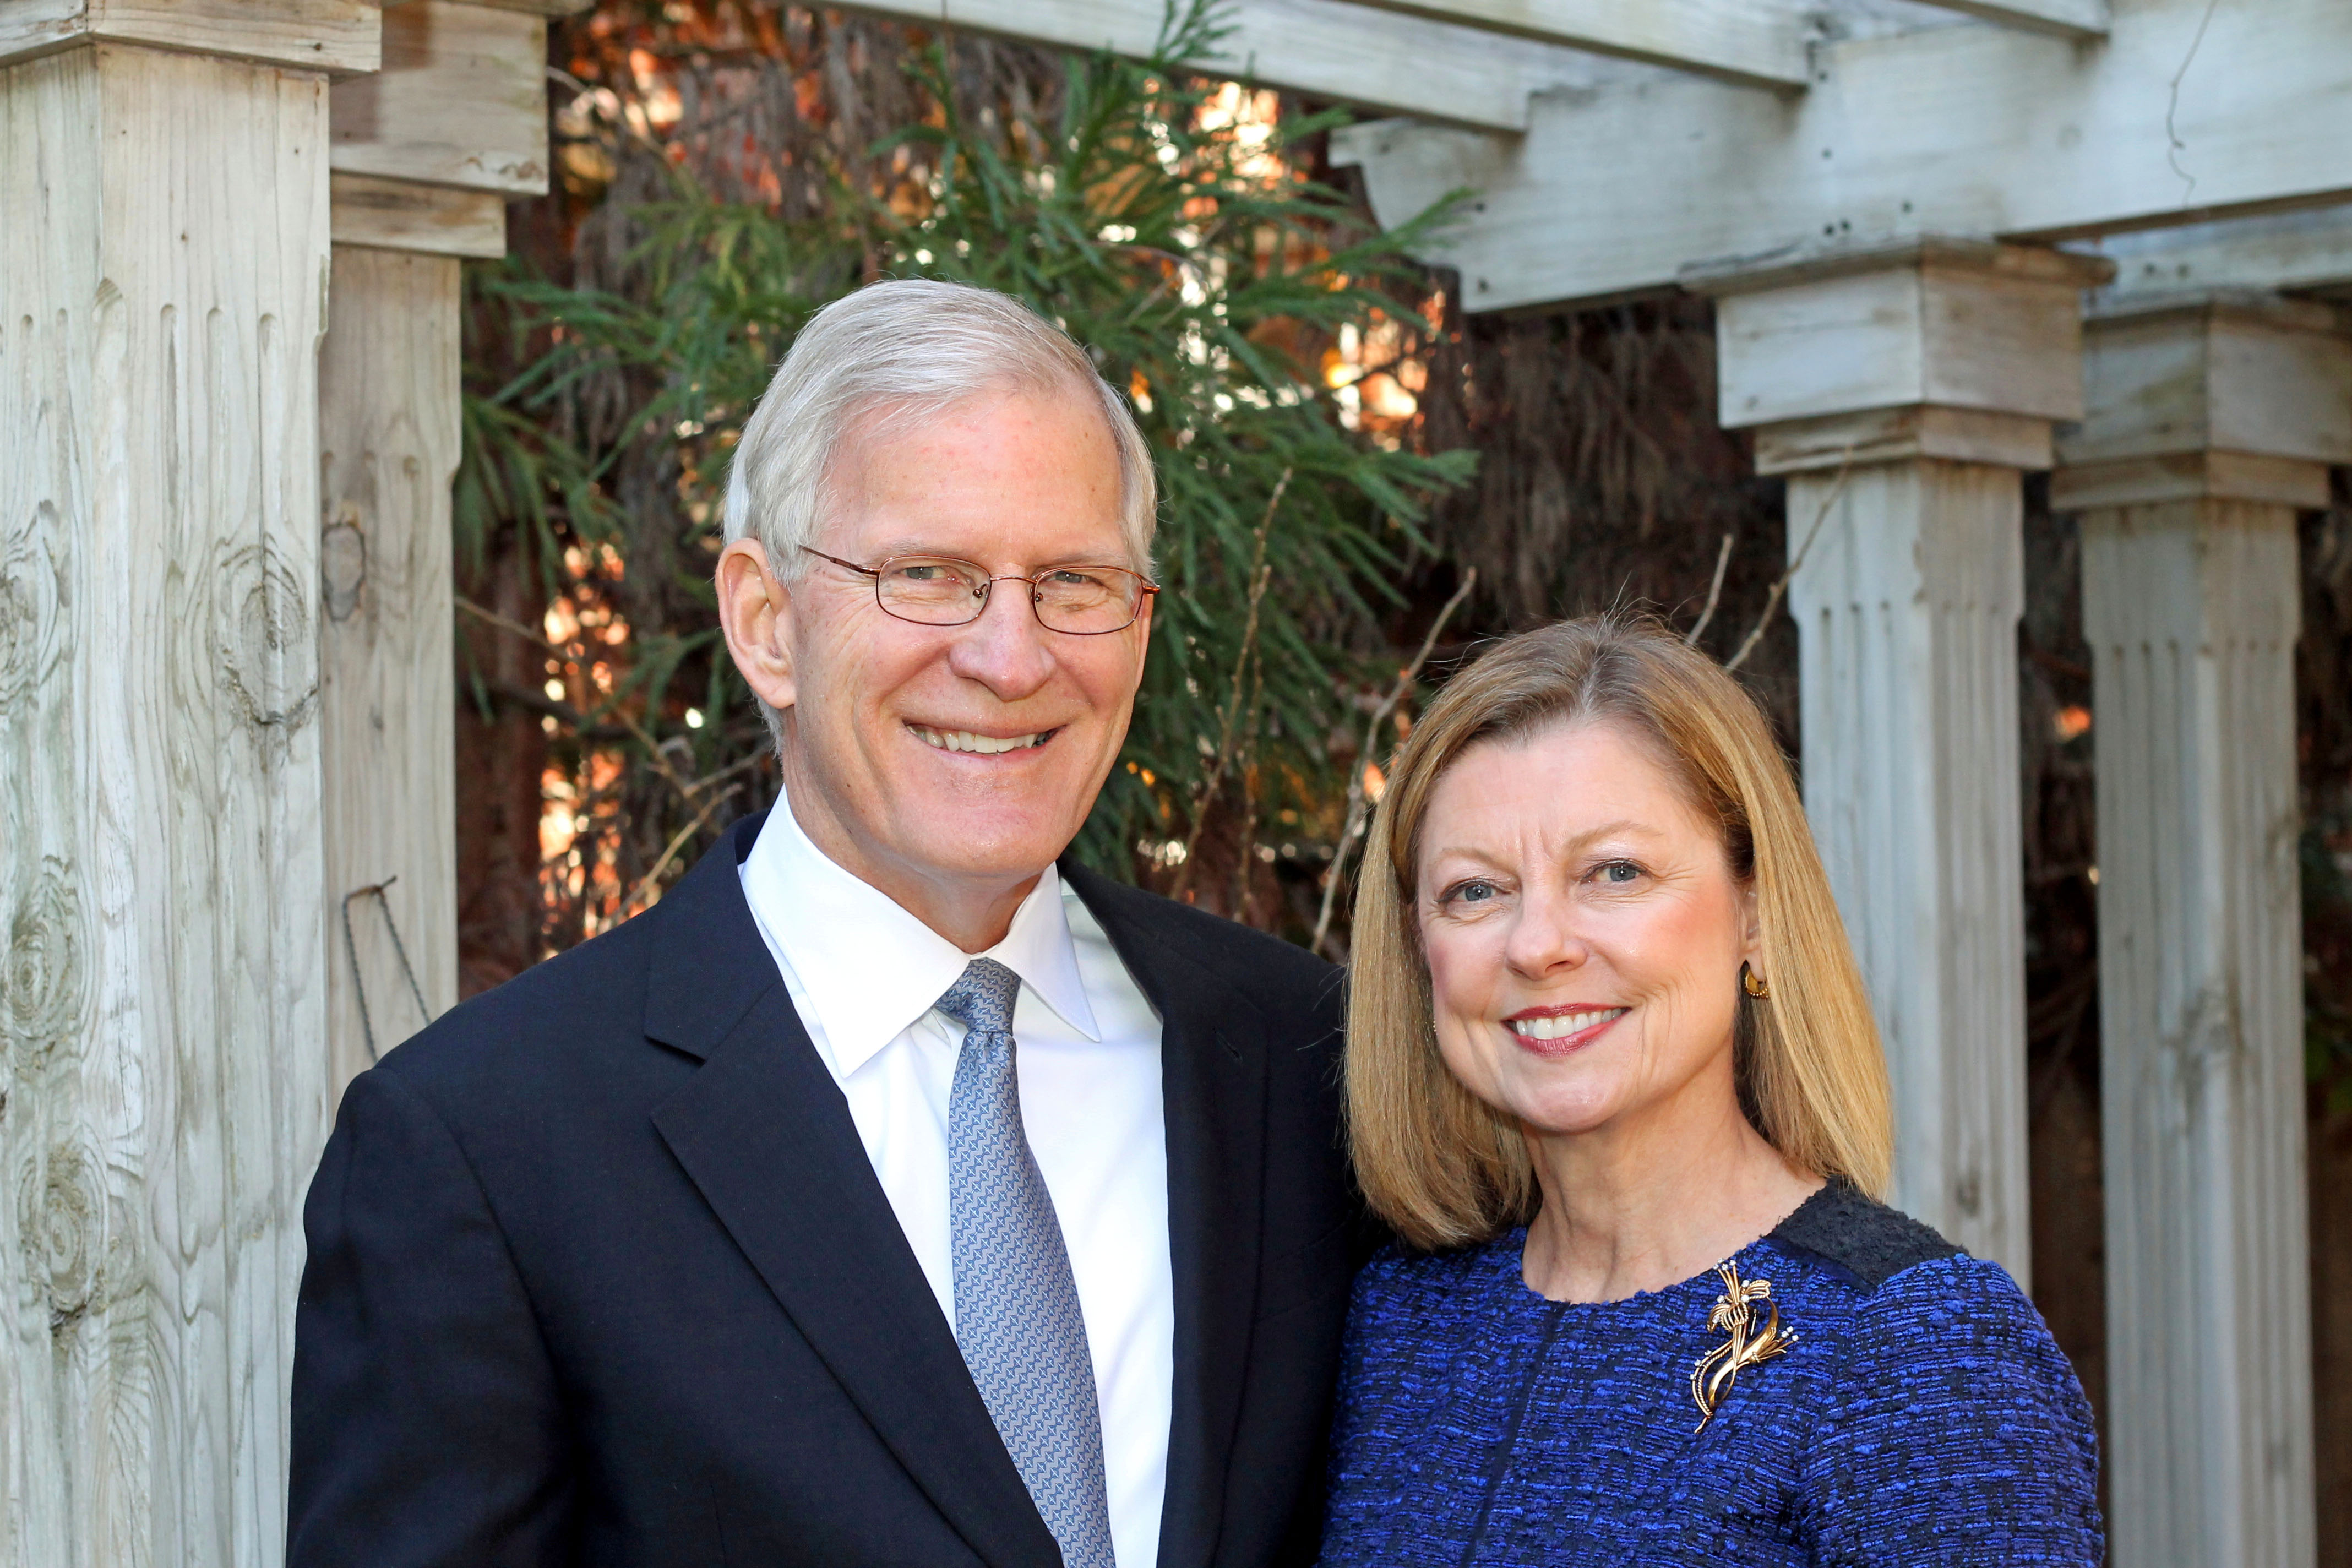 Mackey and Susan McDonald (Board Chair) Children’s Home Society of NC